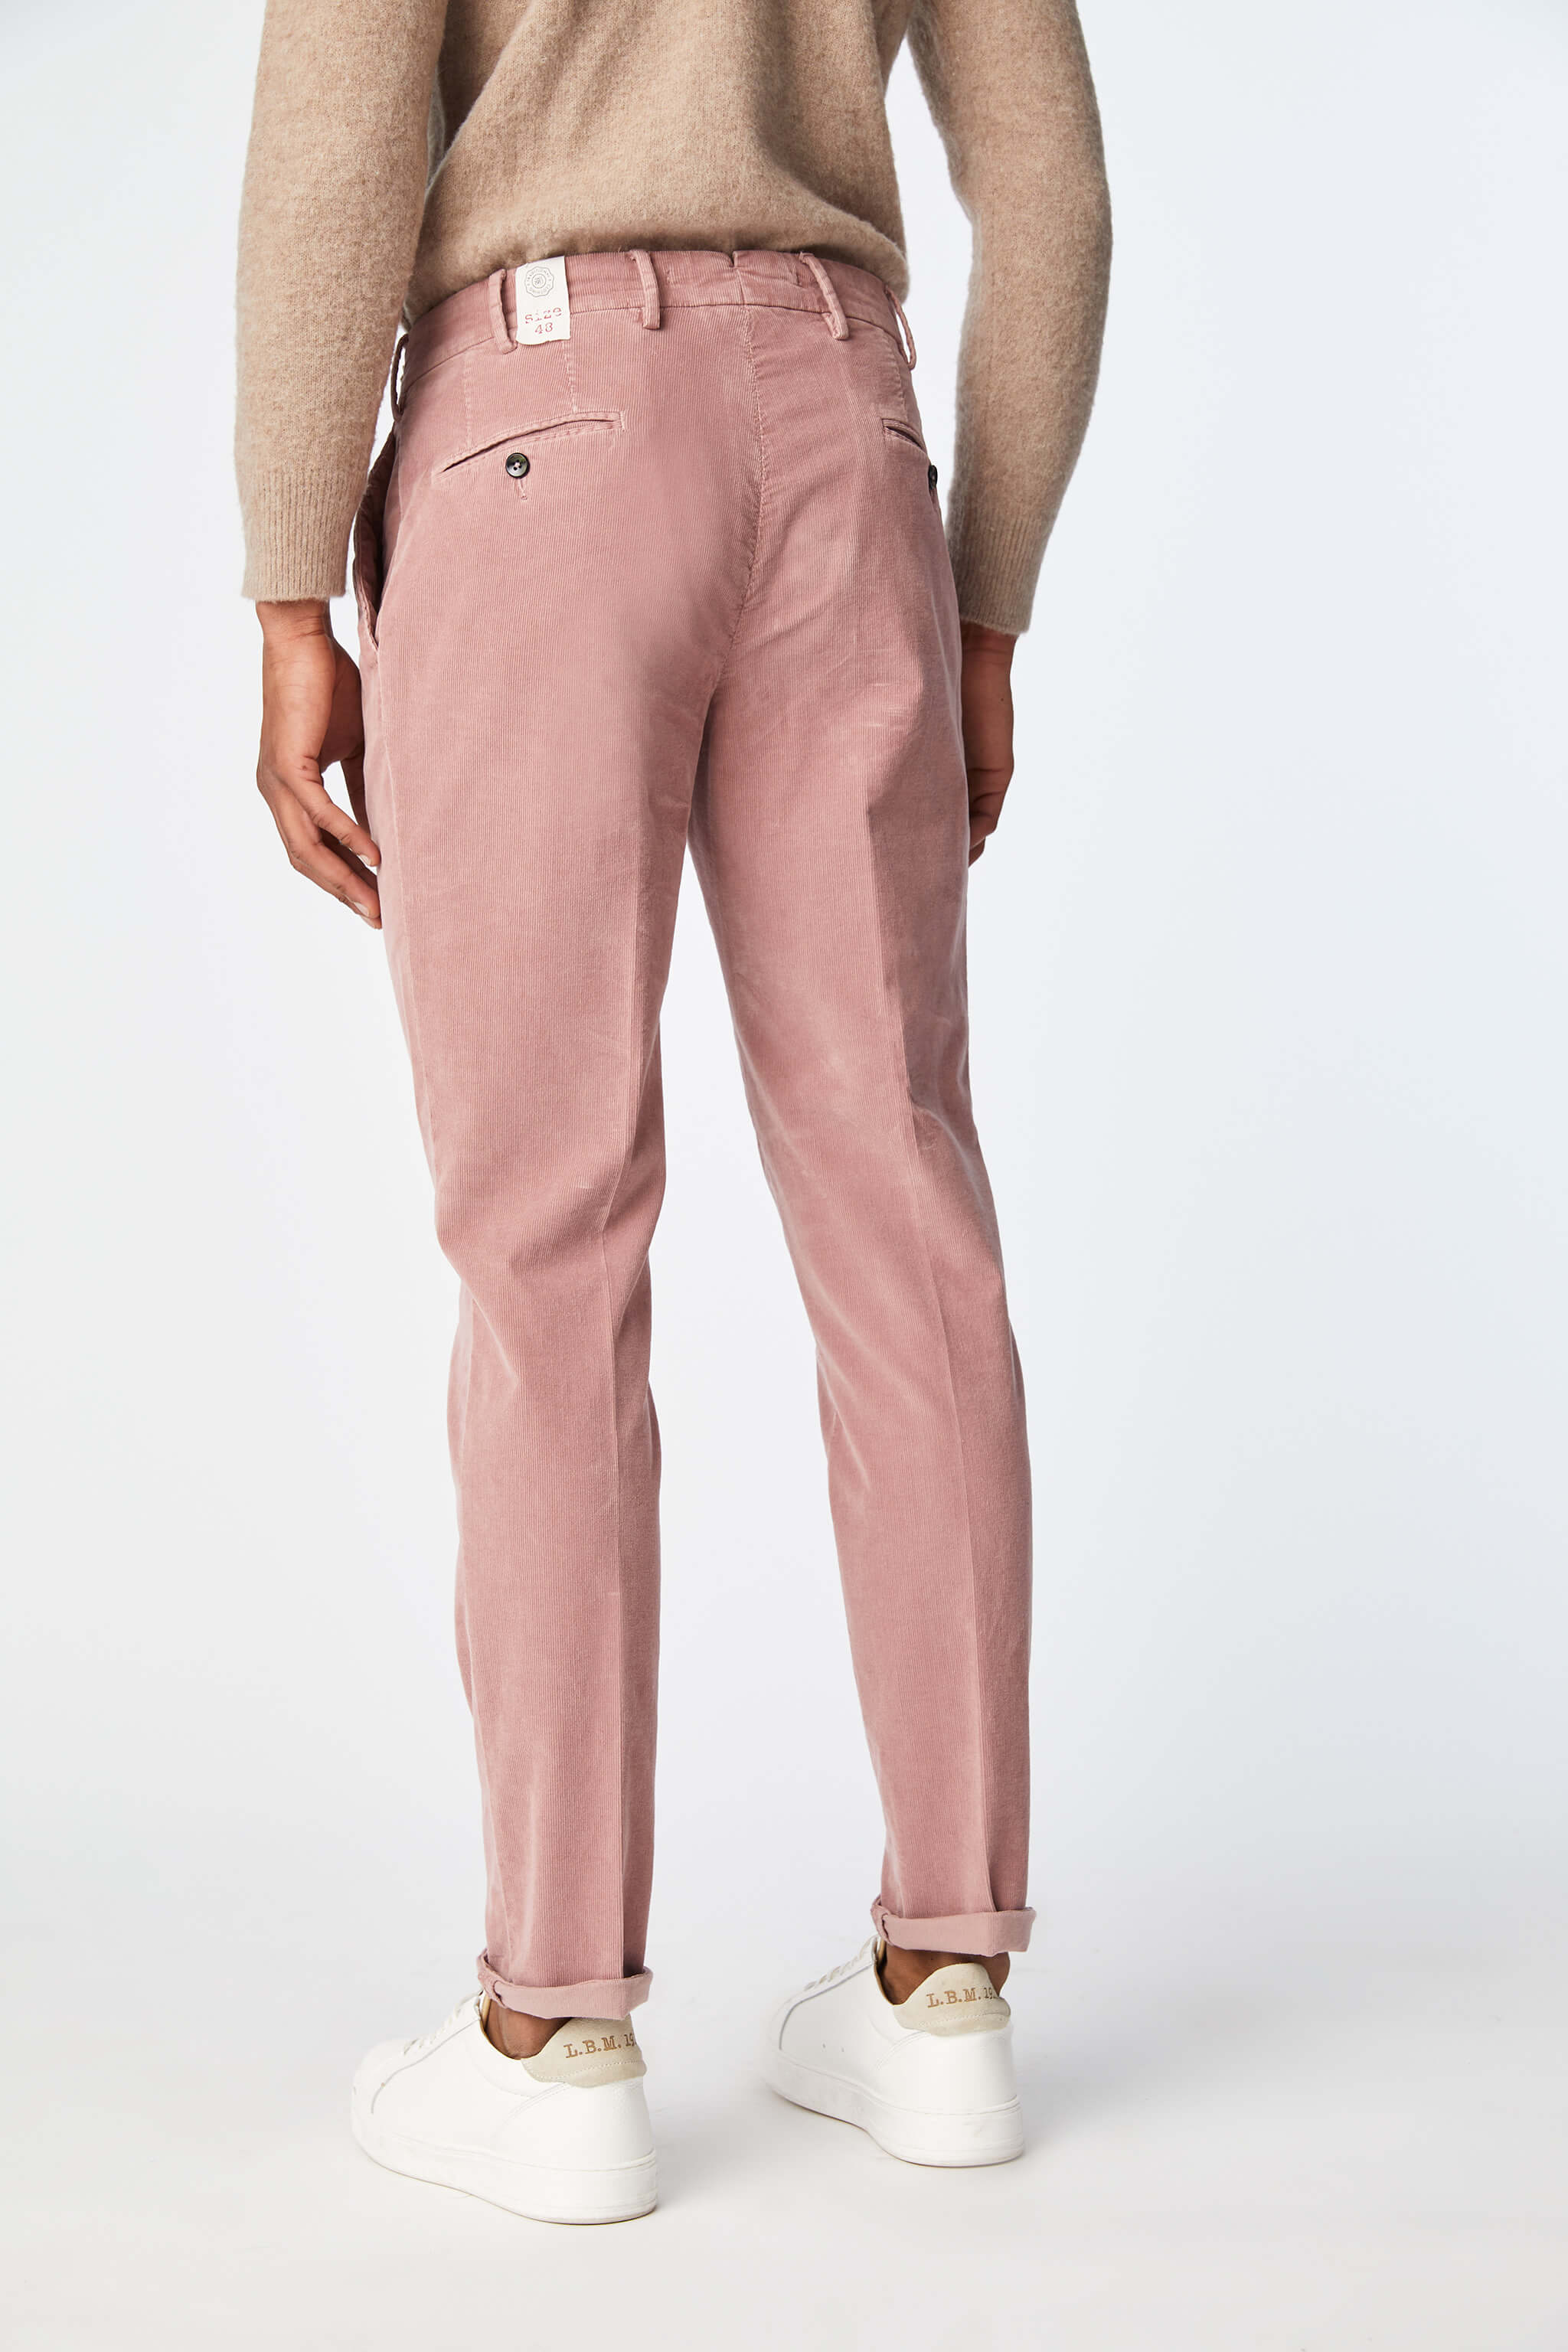 Garment-dyed MUDDY pants in pink